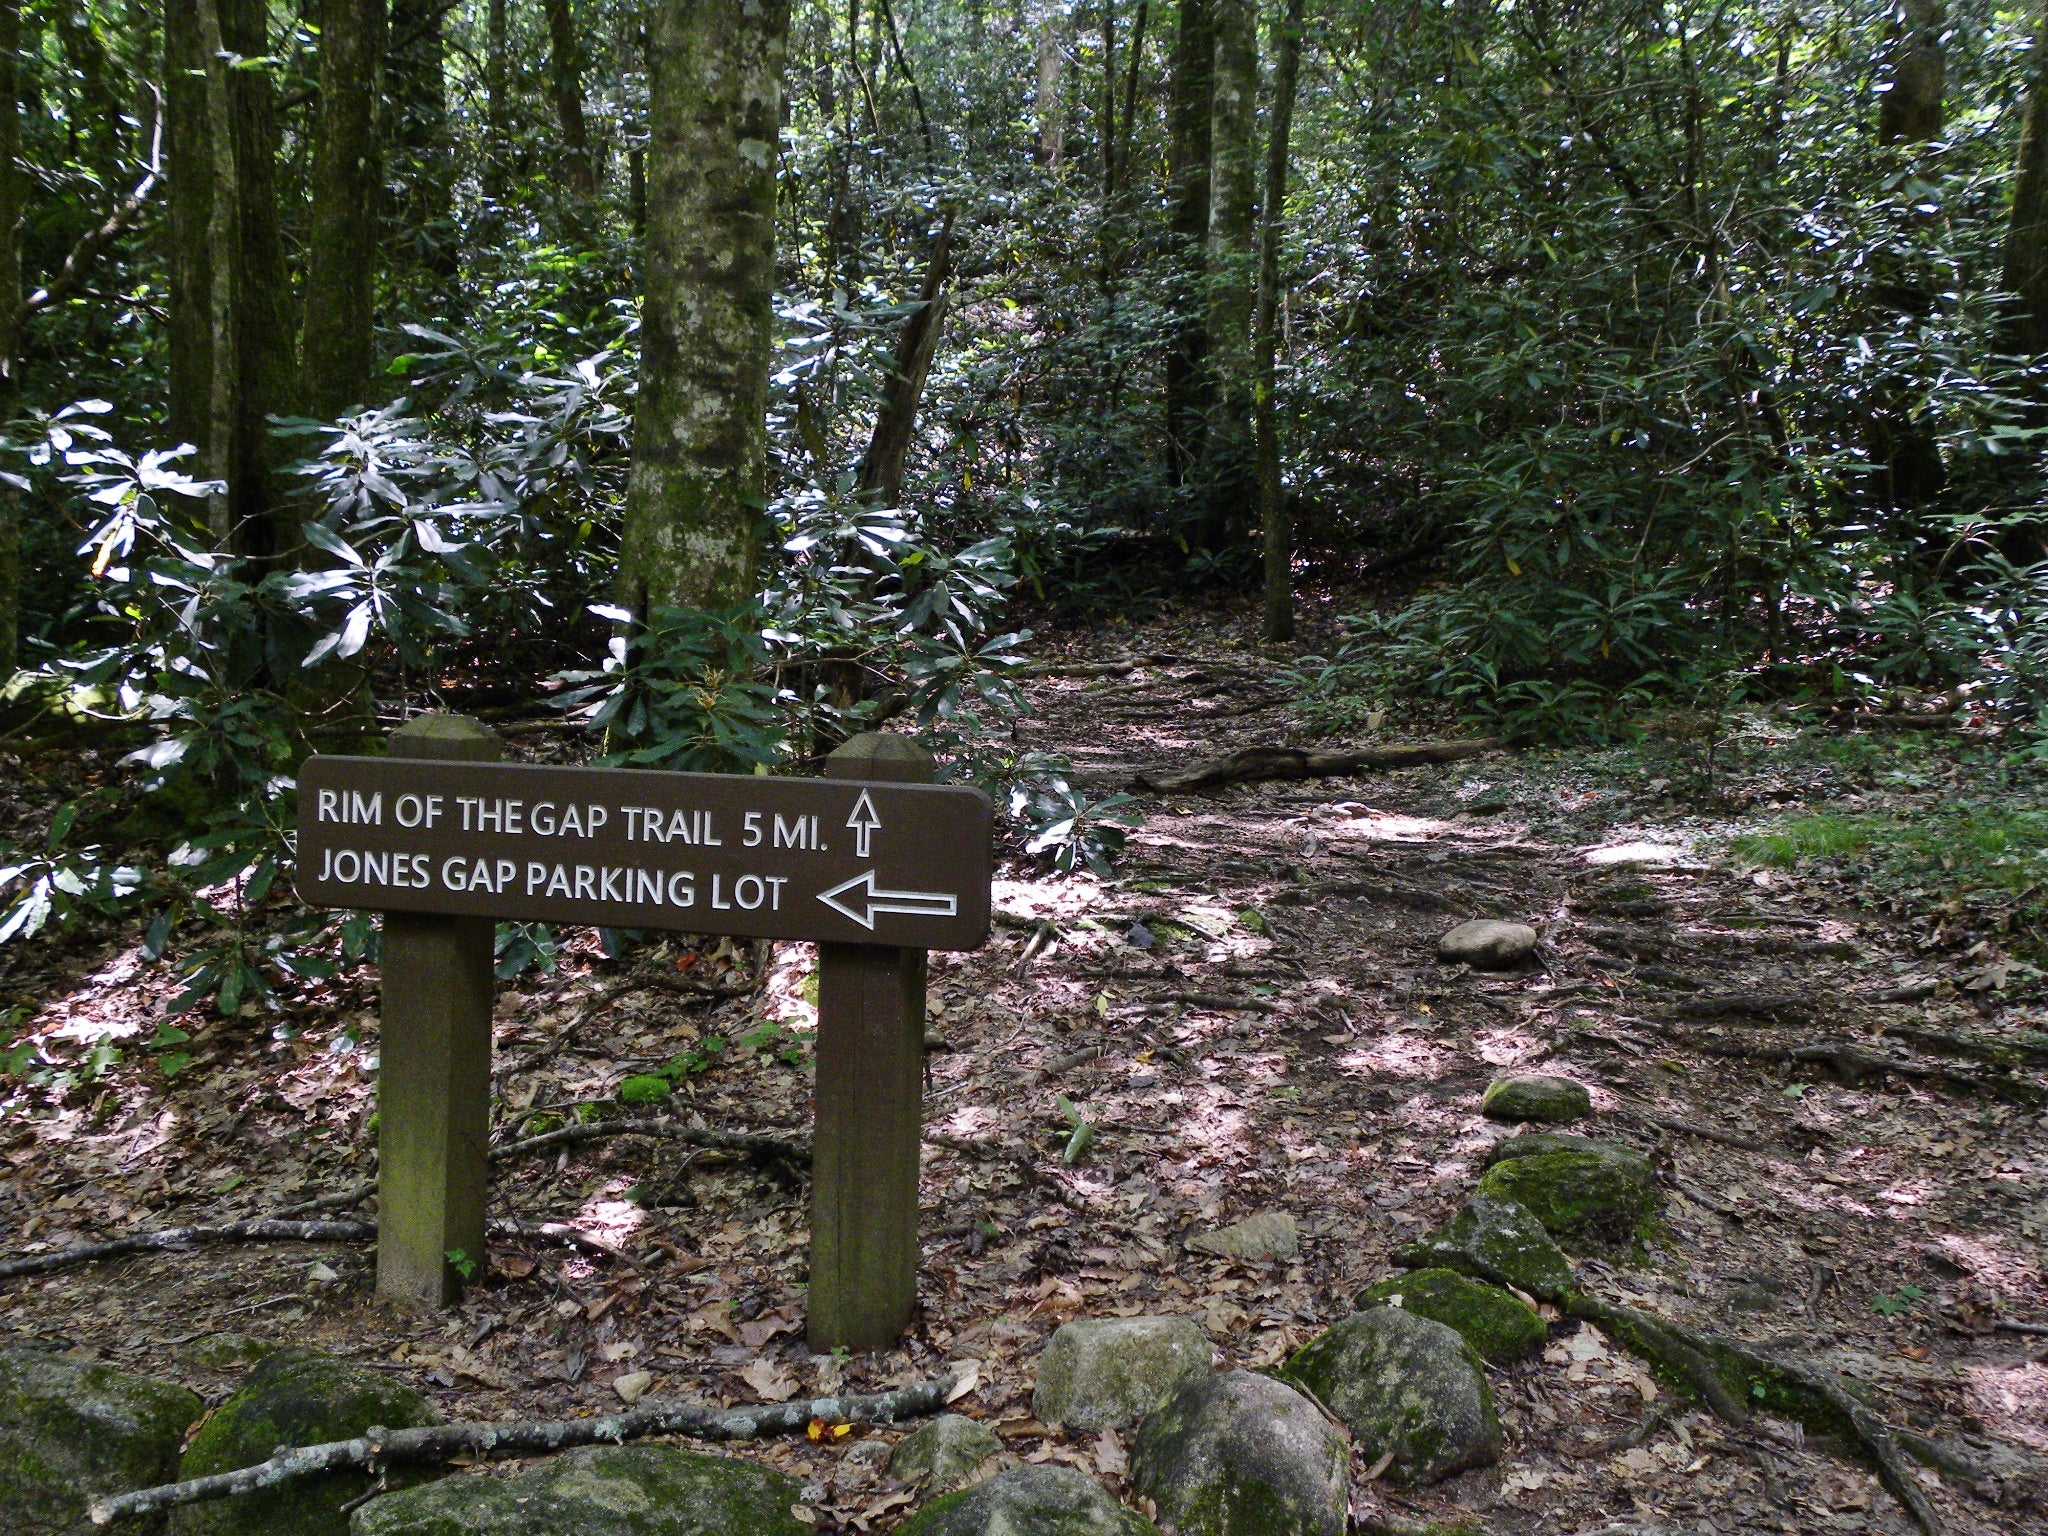 The Rim of the Gap Trail is not too far from the campsite.